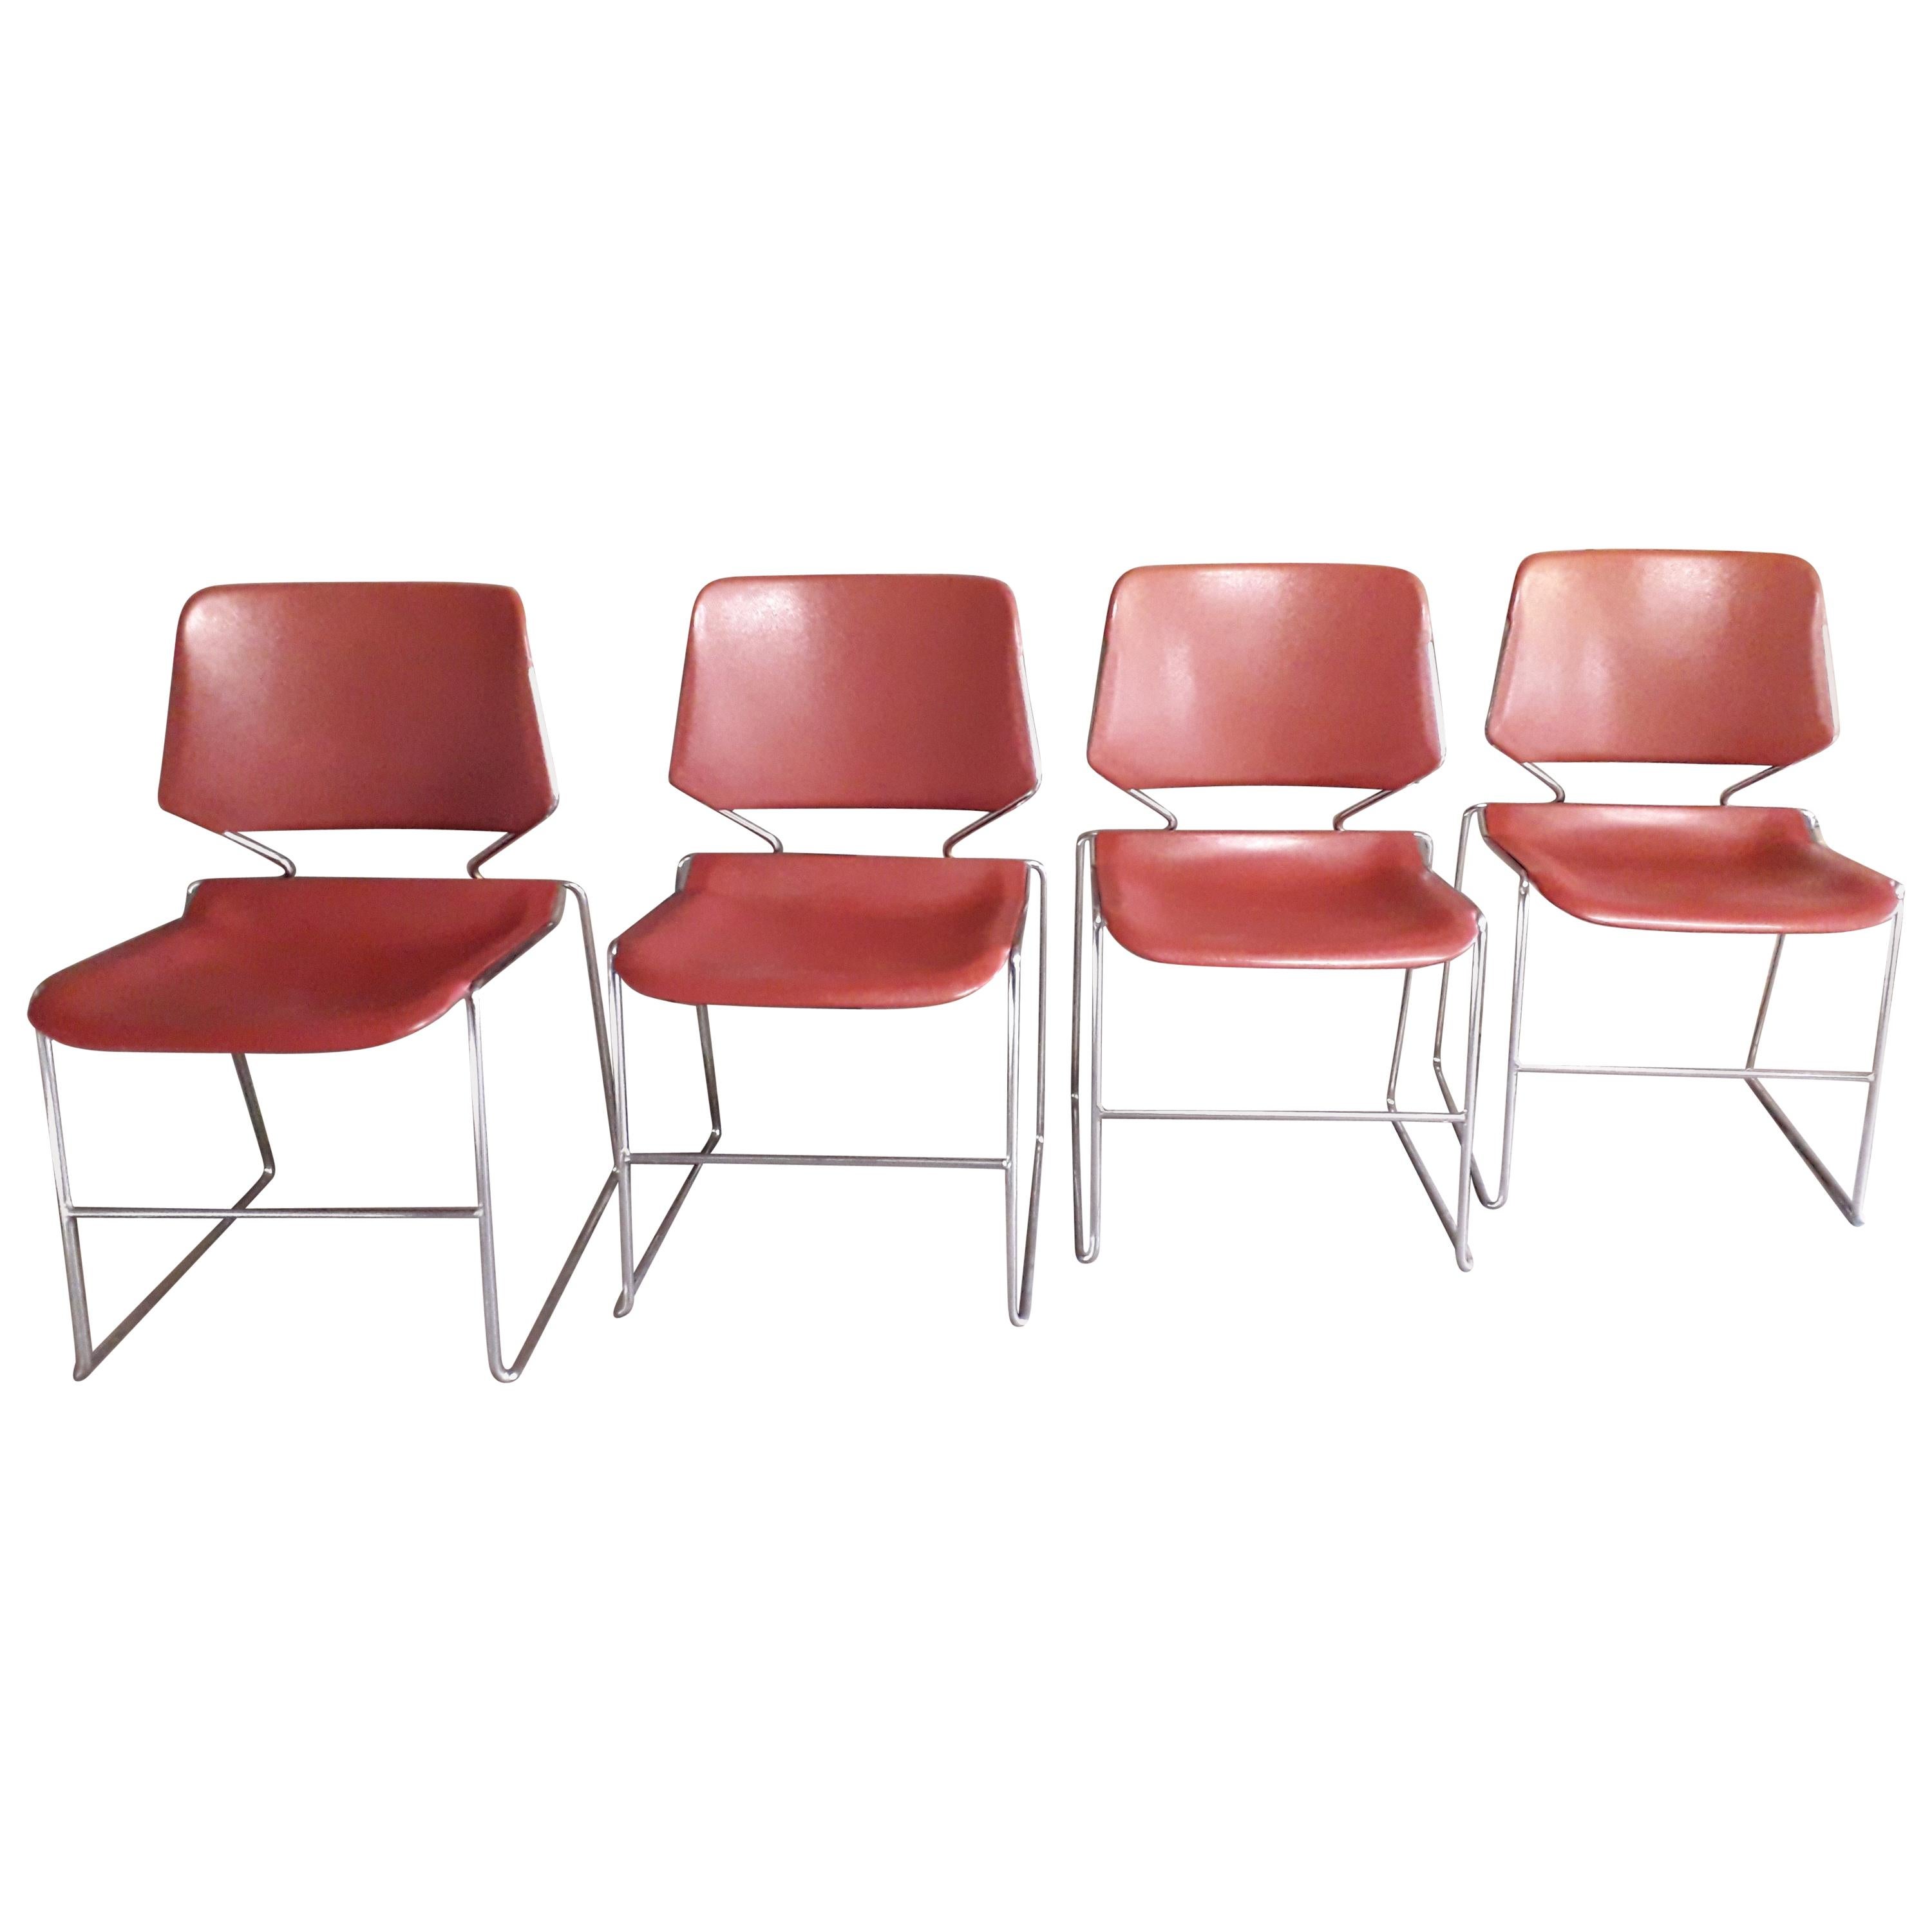 Krueger Set of Four Chrome and Plastic Chairs